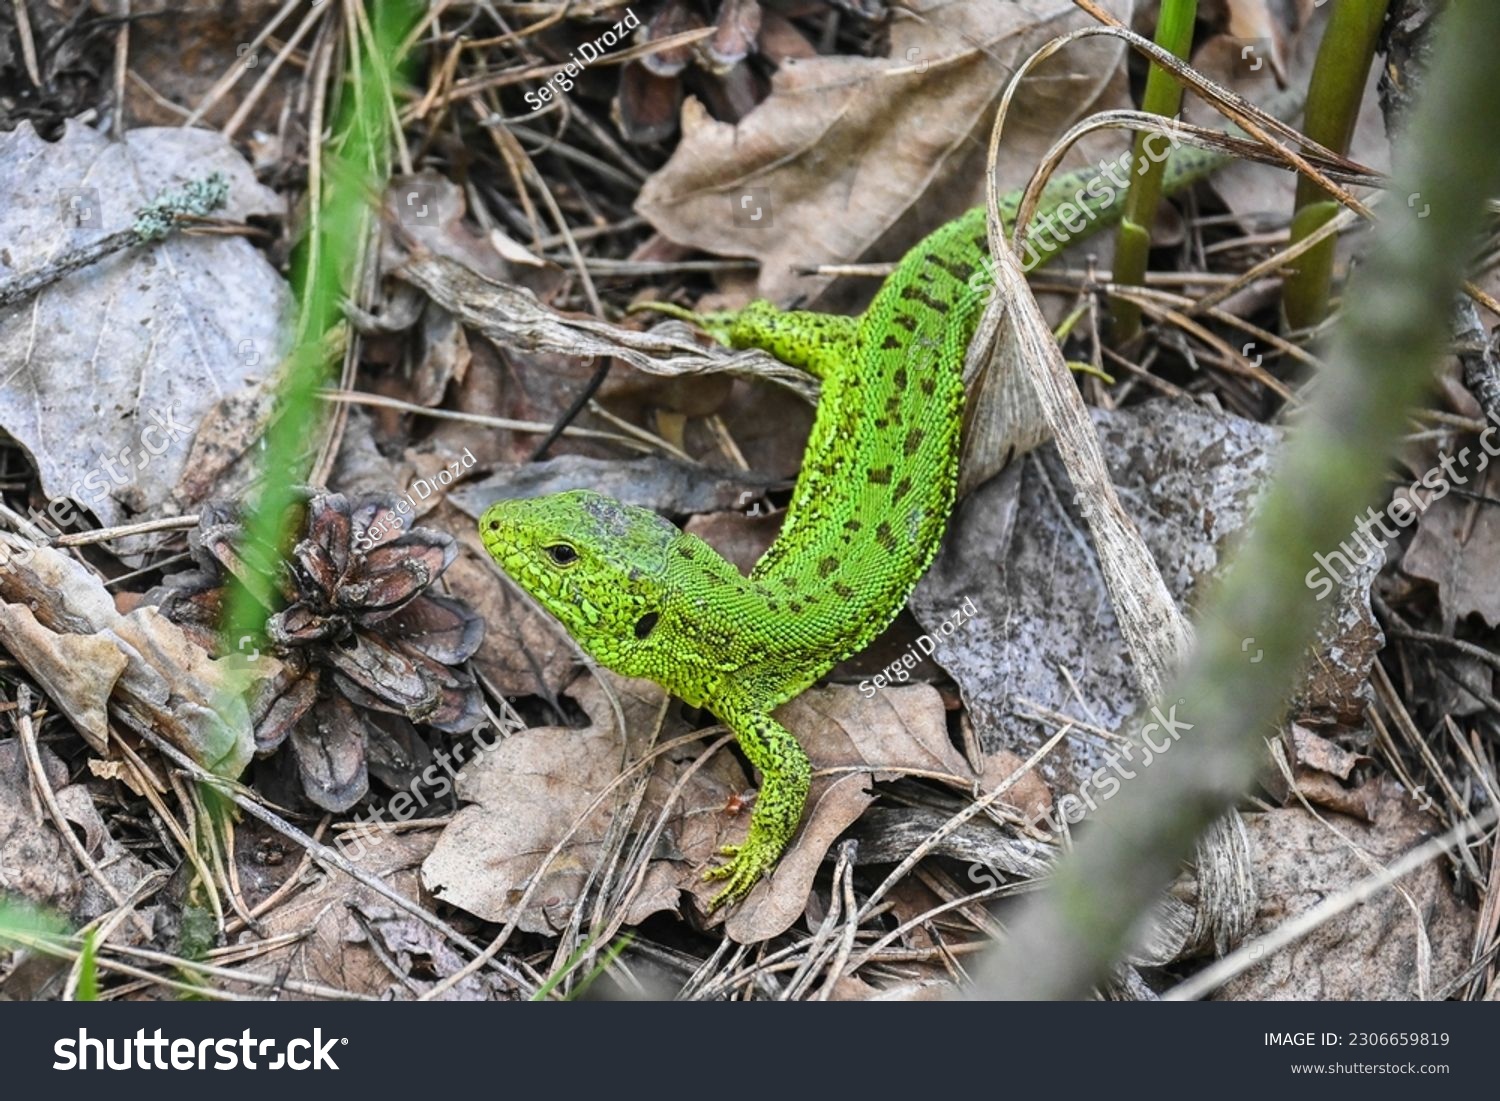 A nimble lizard in the wild. A green lizard on a background of dry stems and leaves. #2306659819